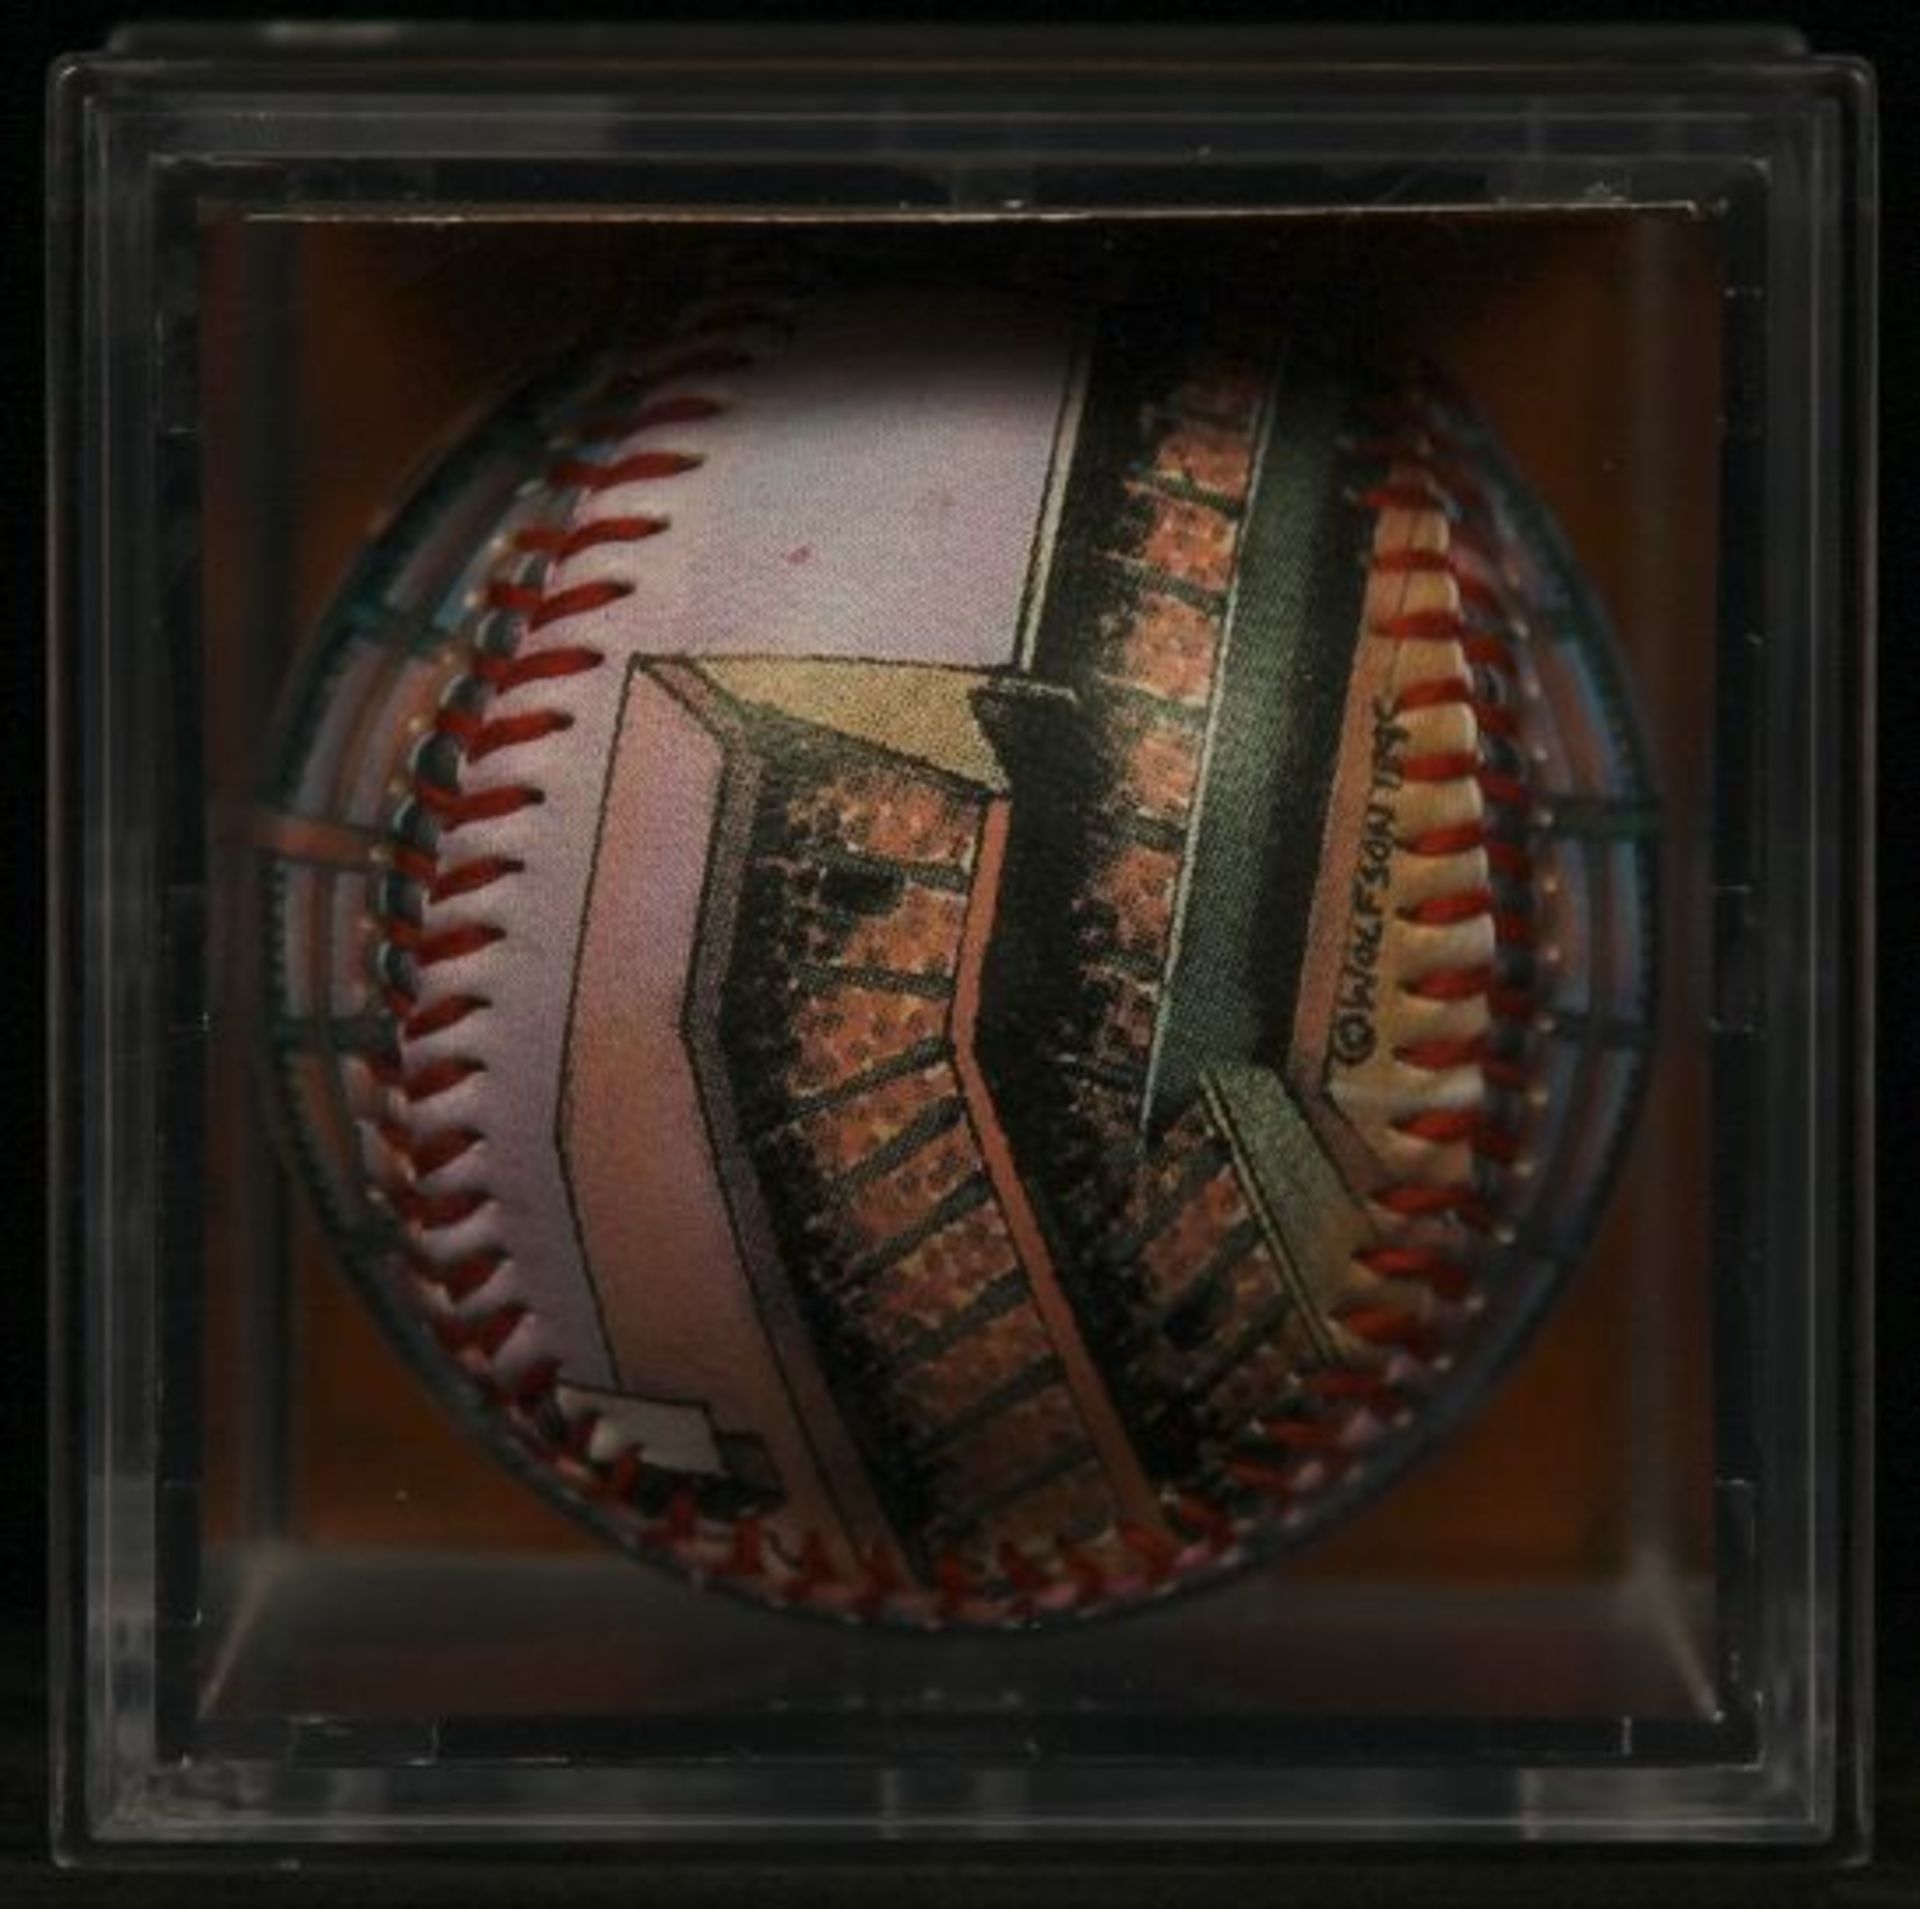 Unforgettaball! "Sportsman's Park" Nostalgia Series Collectable Baseball - Image 4 of 4